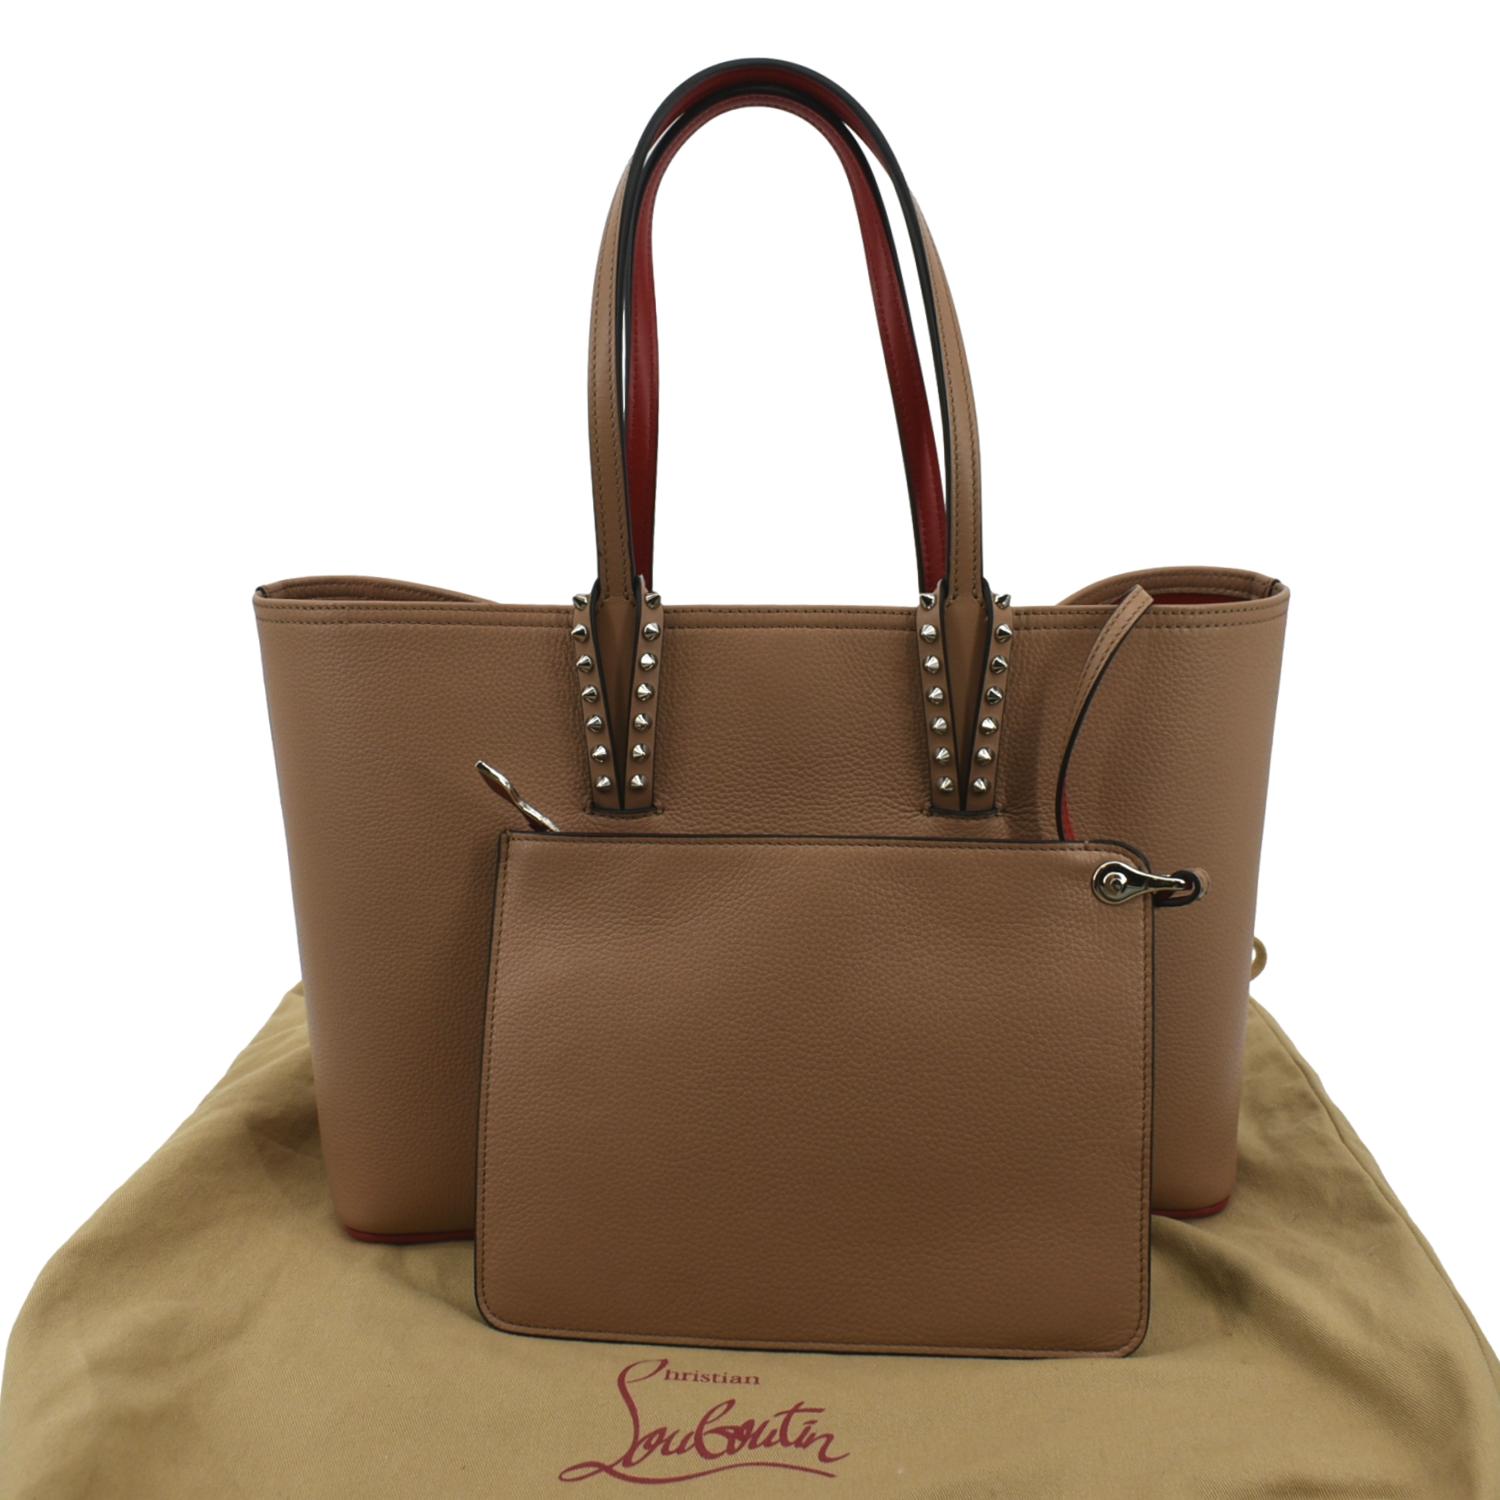 Cabata Small Leather Tote in Beige - Christian Louboutin